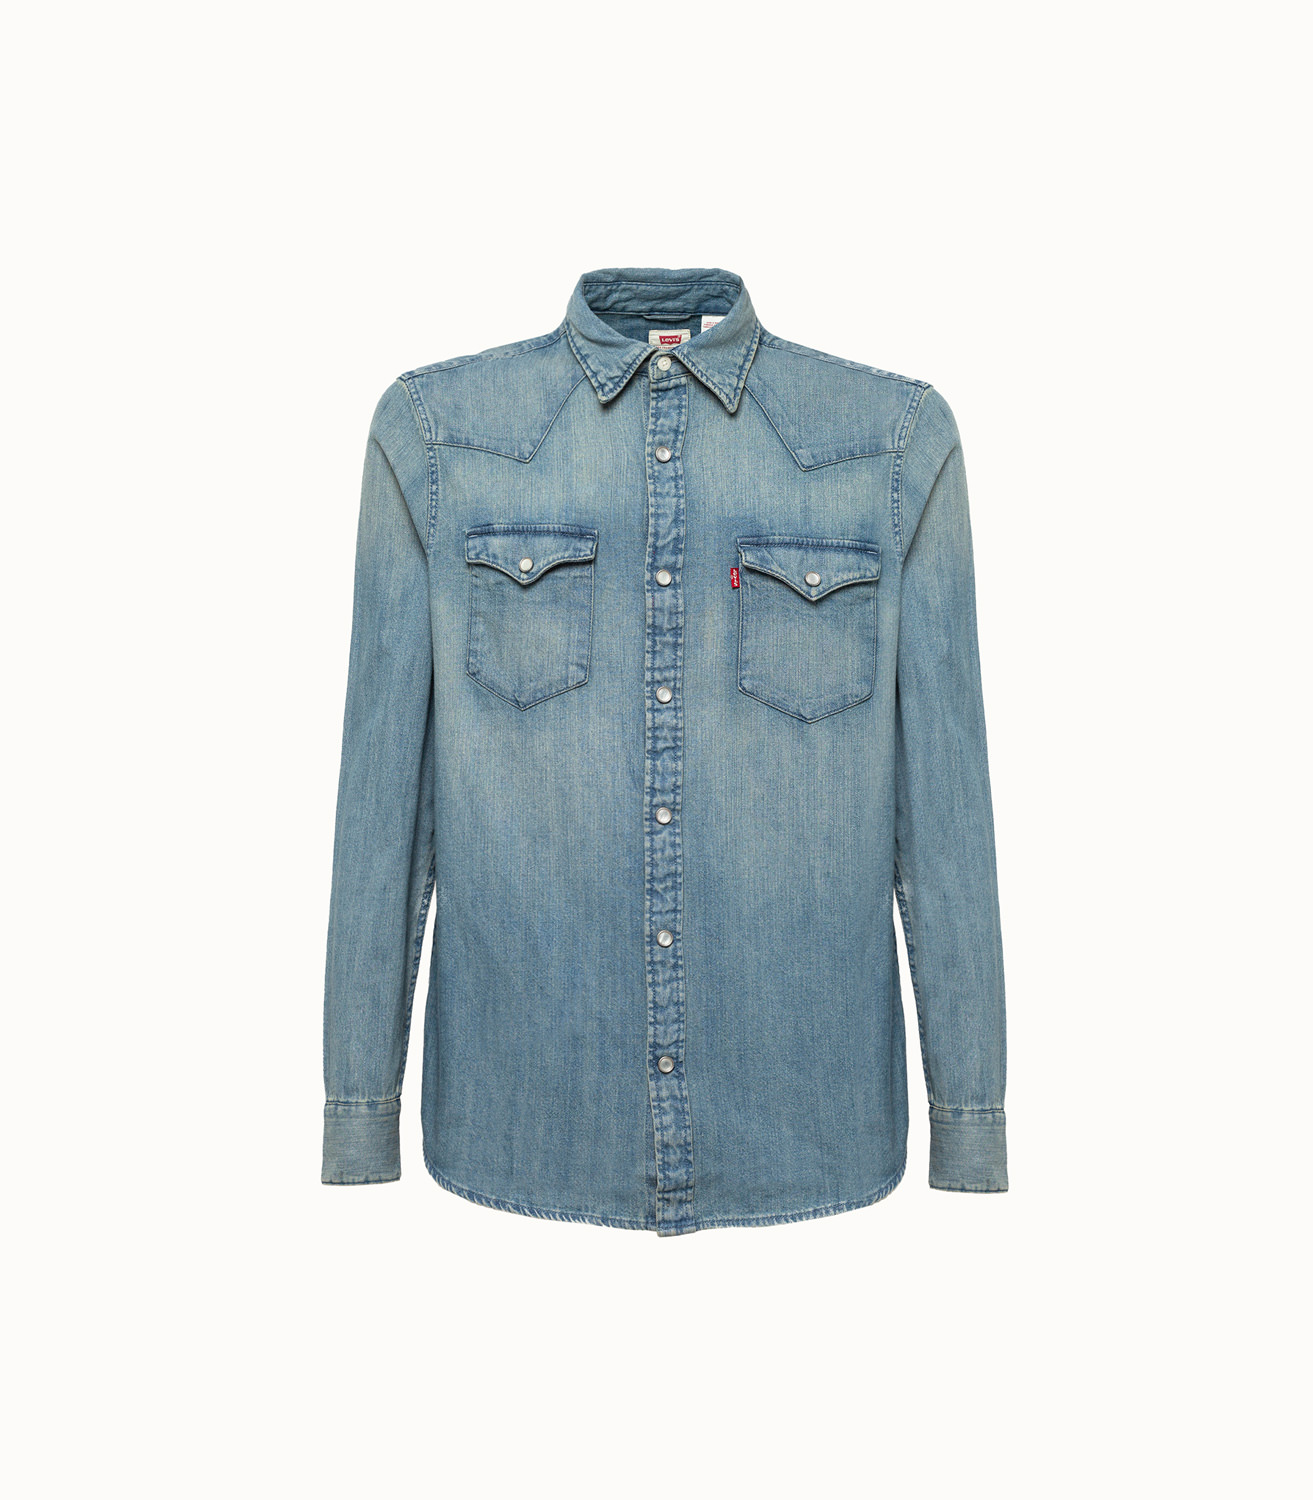 levis barstow western shirt